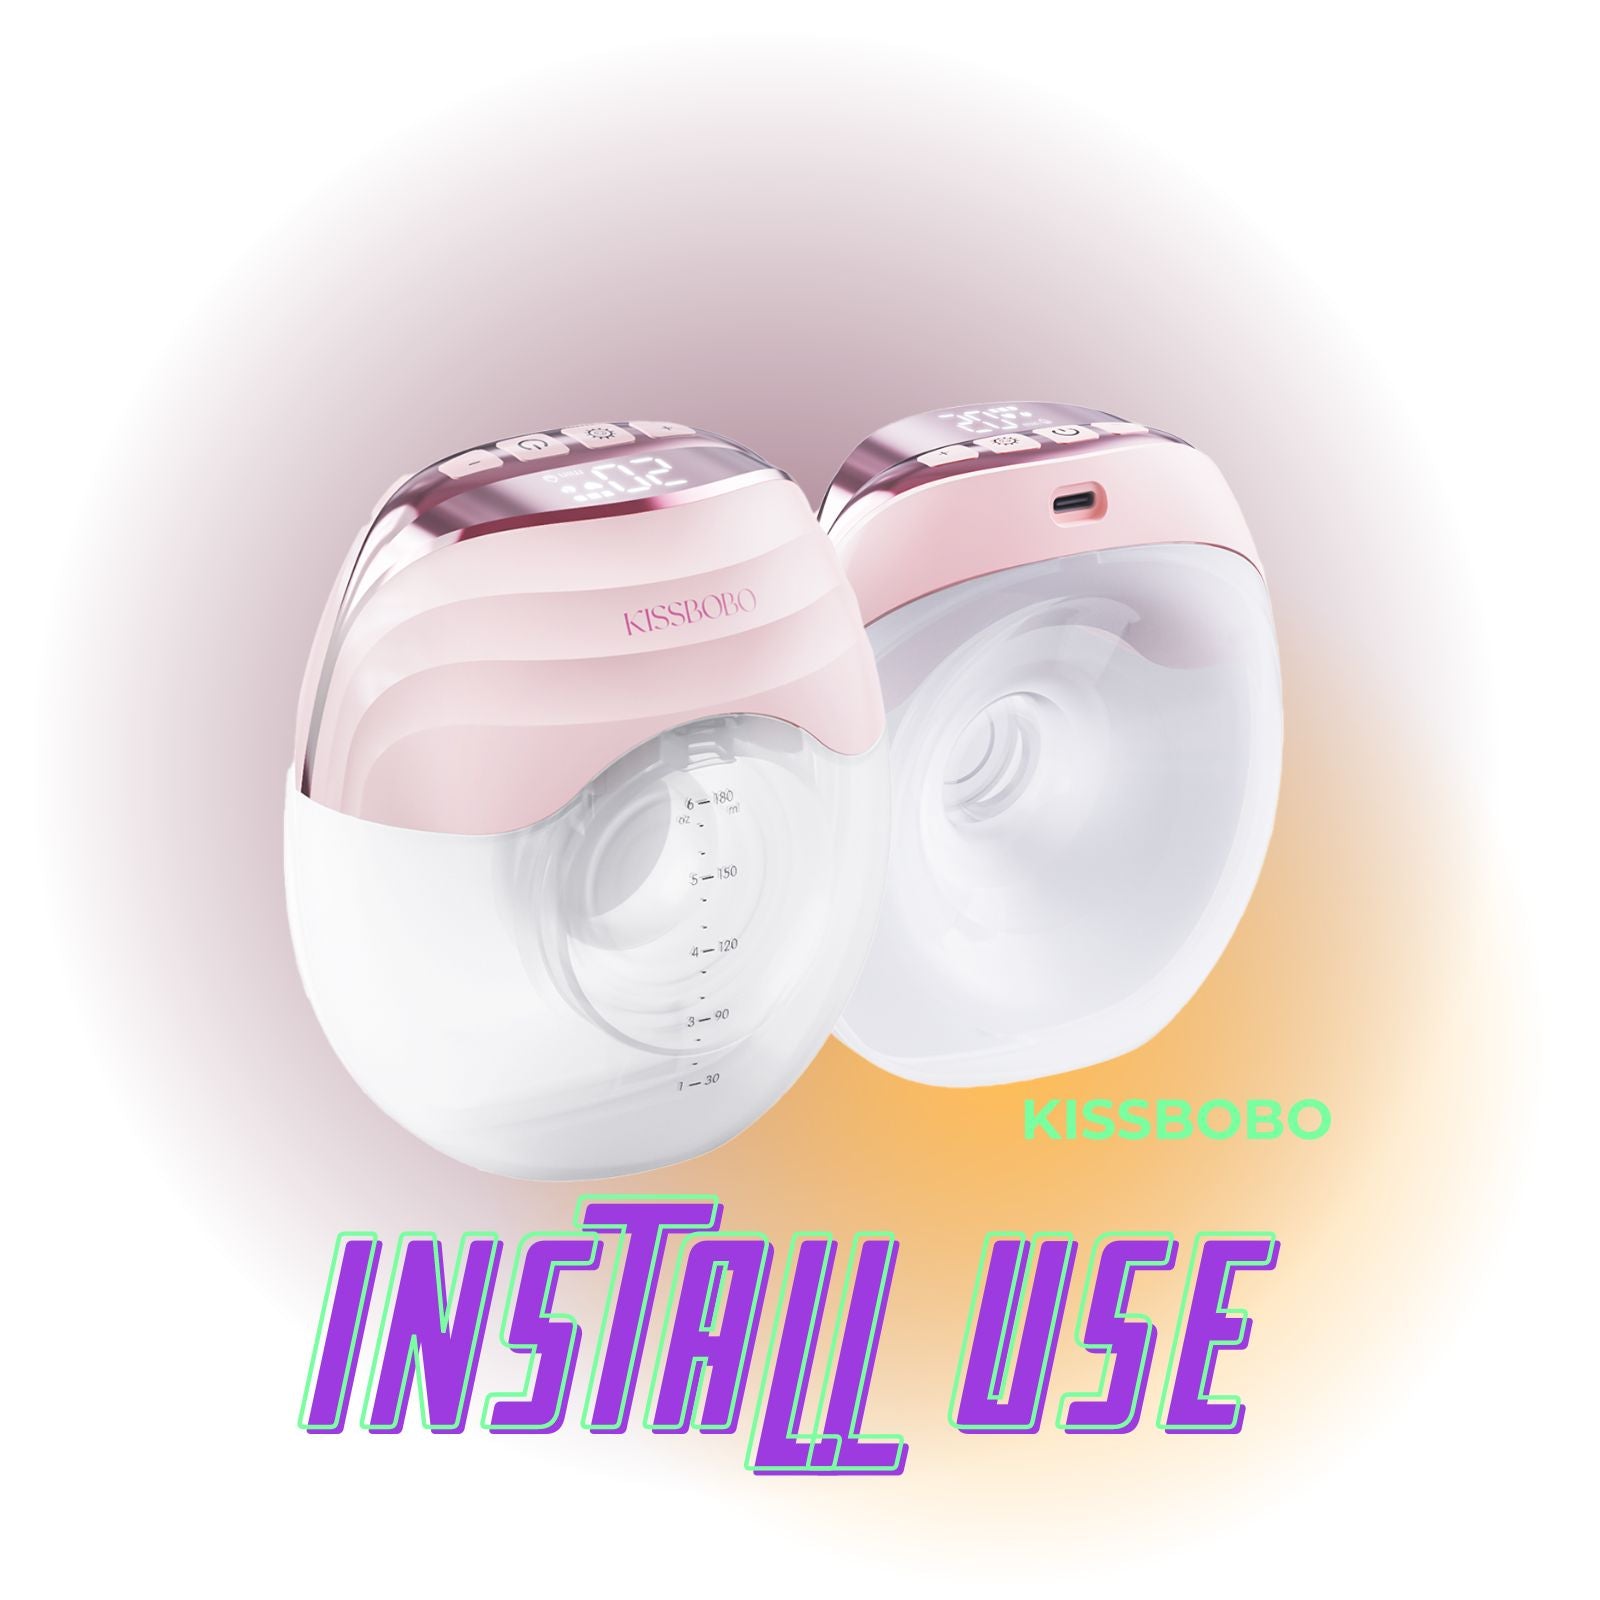 Install and Use the Gle10 Breast Pump